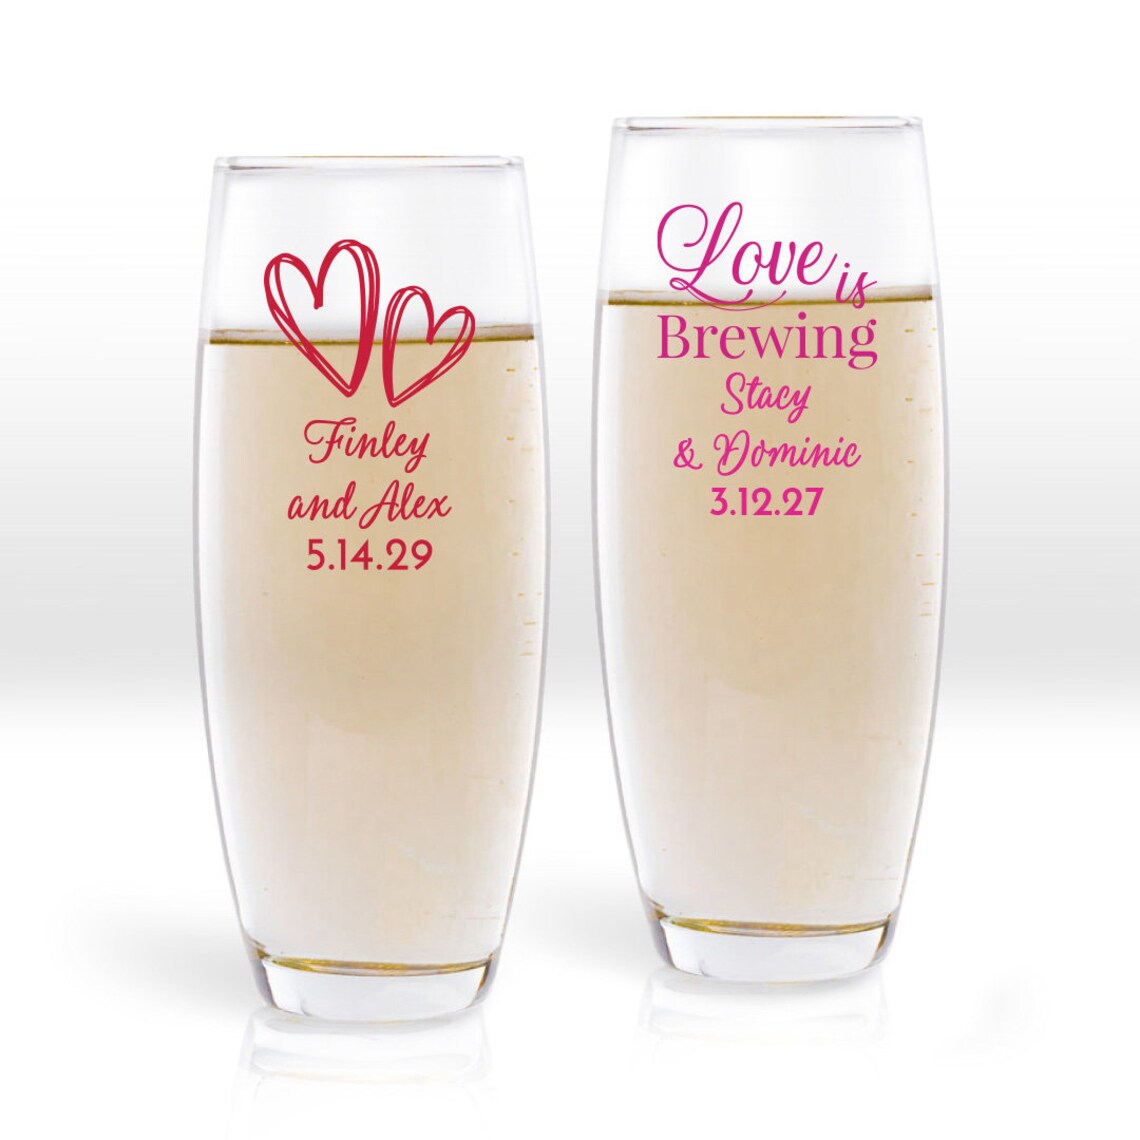 Mr. & Mrs. Wedding Party Personalized Stemless Champagne Glass Favors (Set of 24)